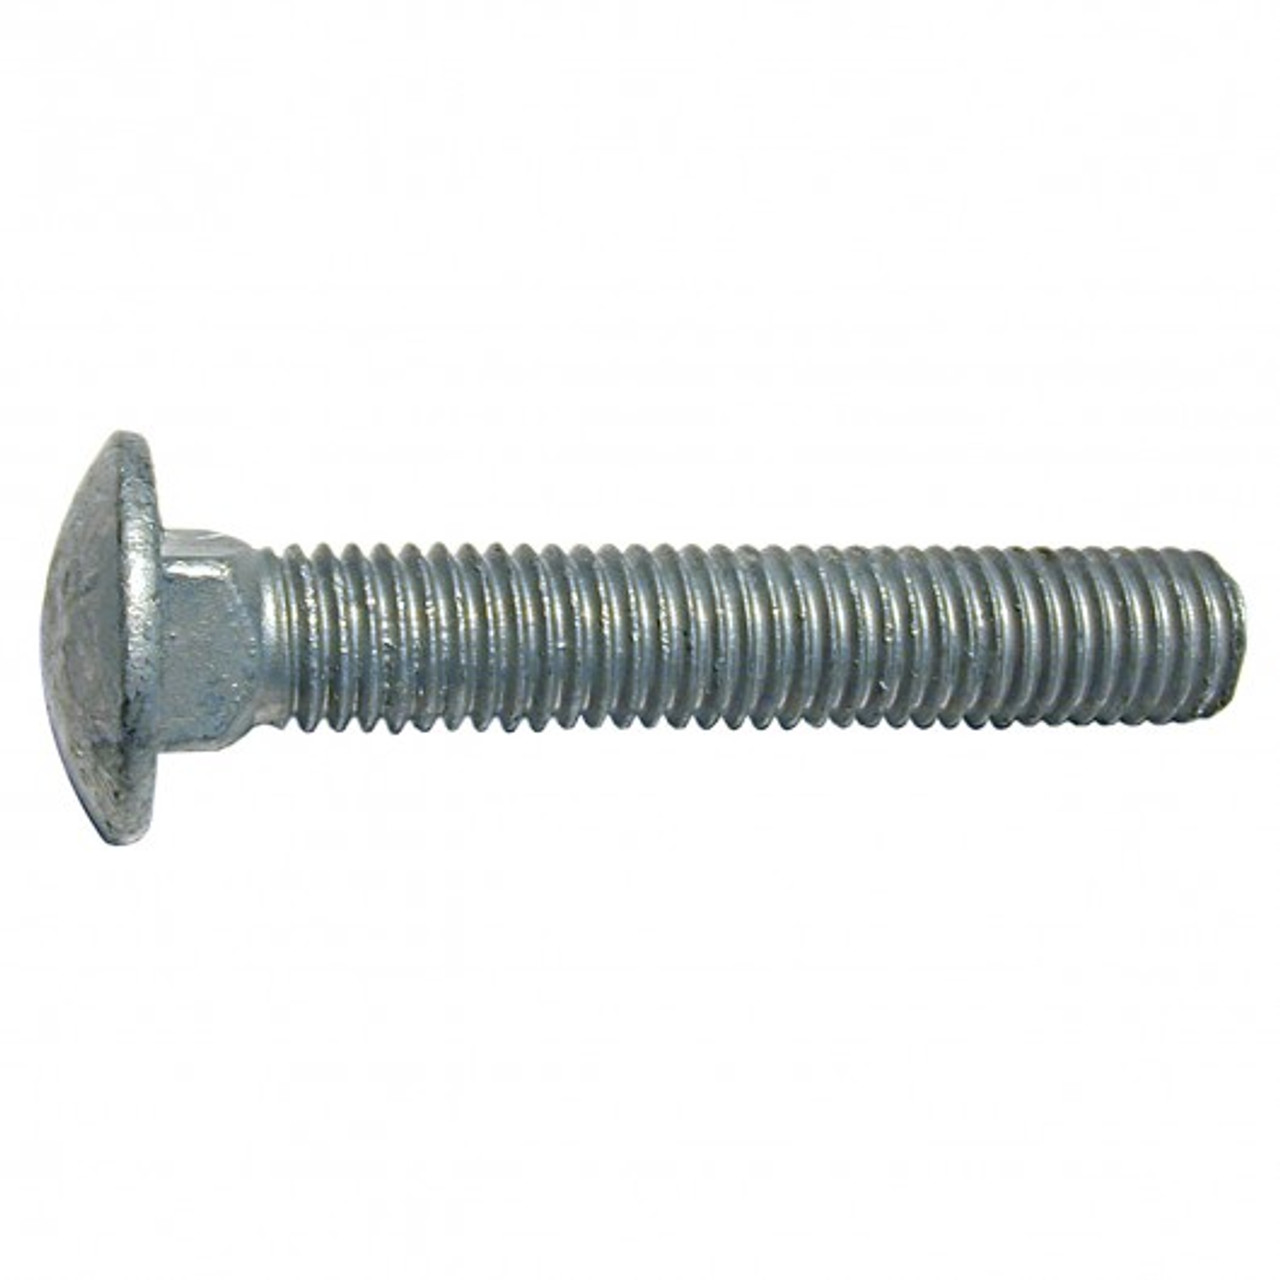 1/2X2 CARRIAGE BOLT UNC GALV